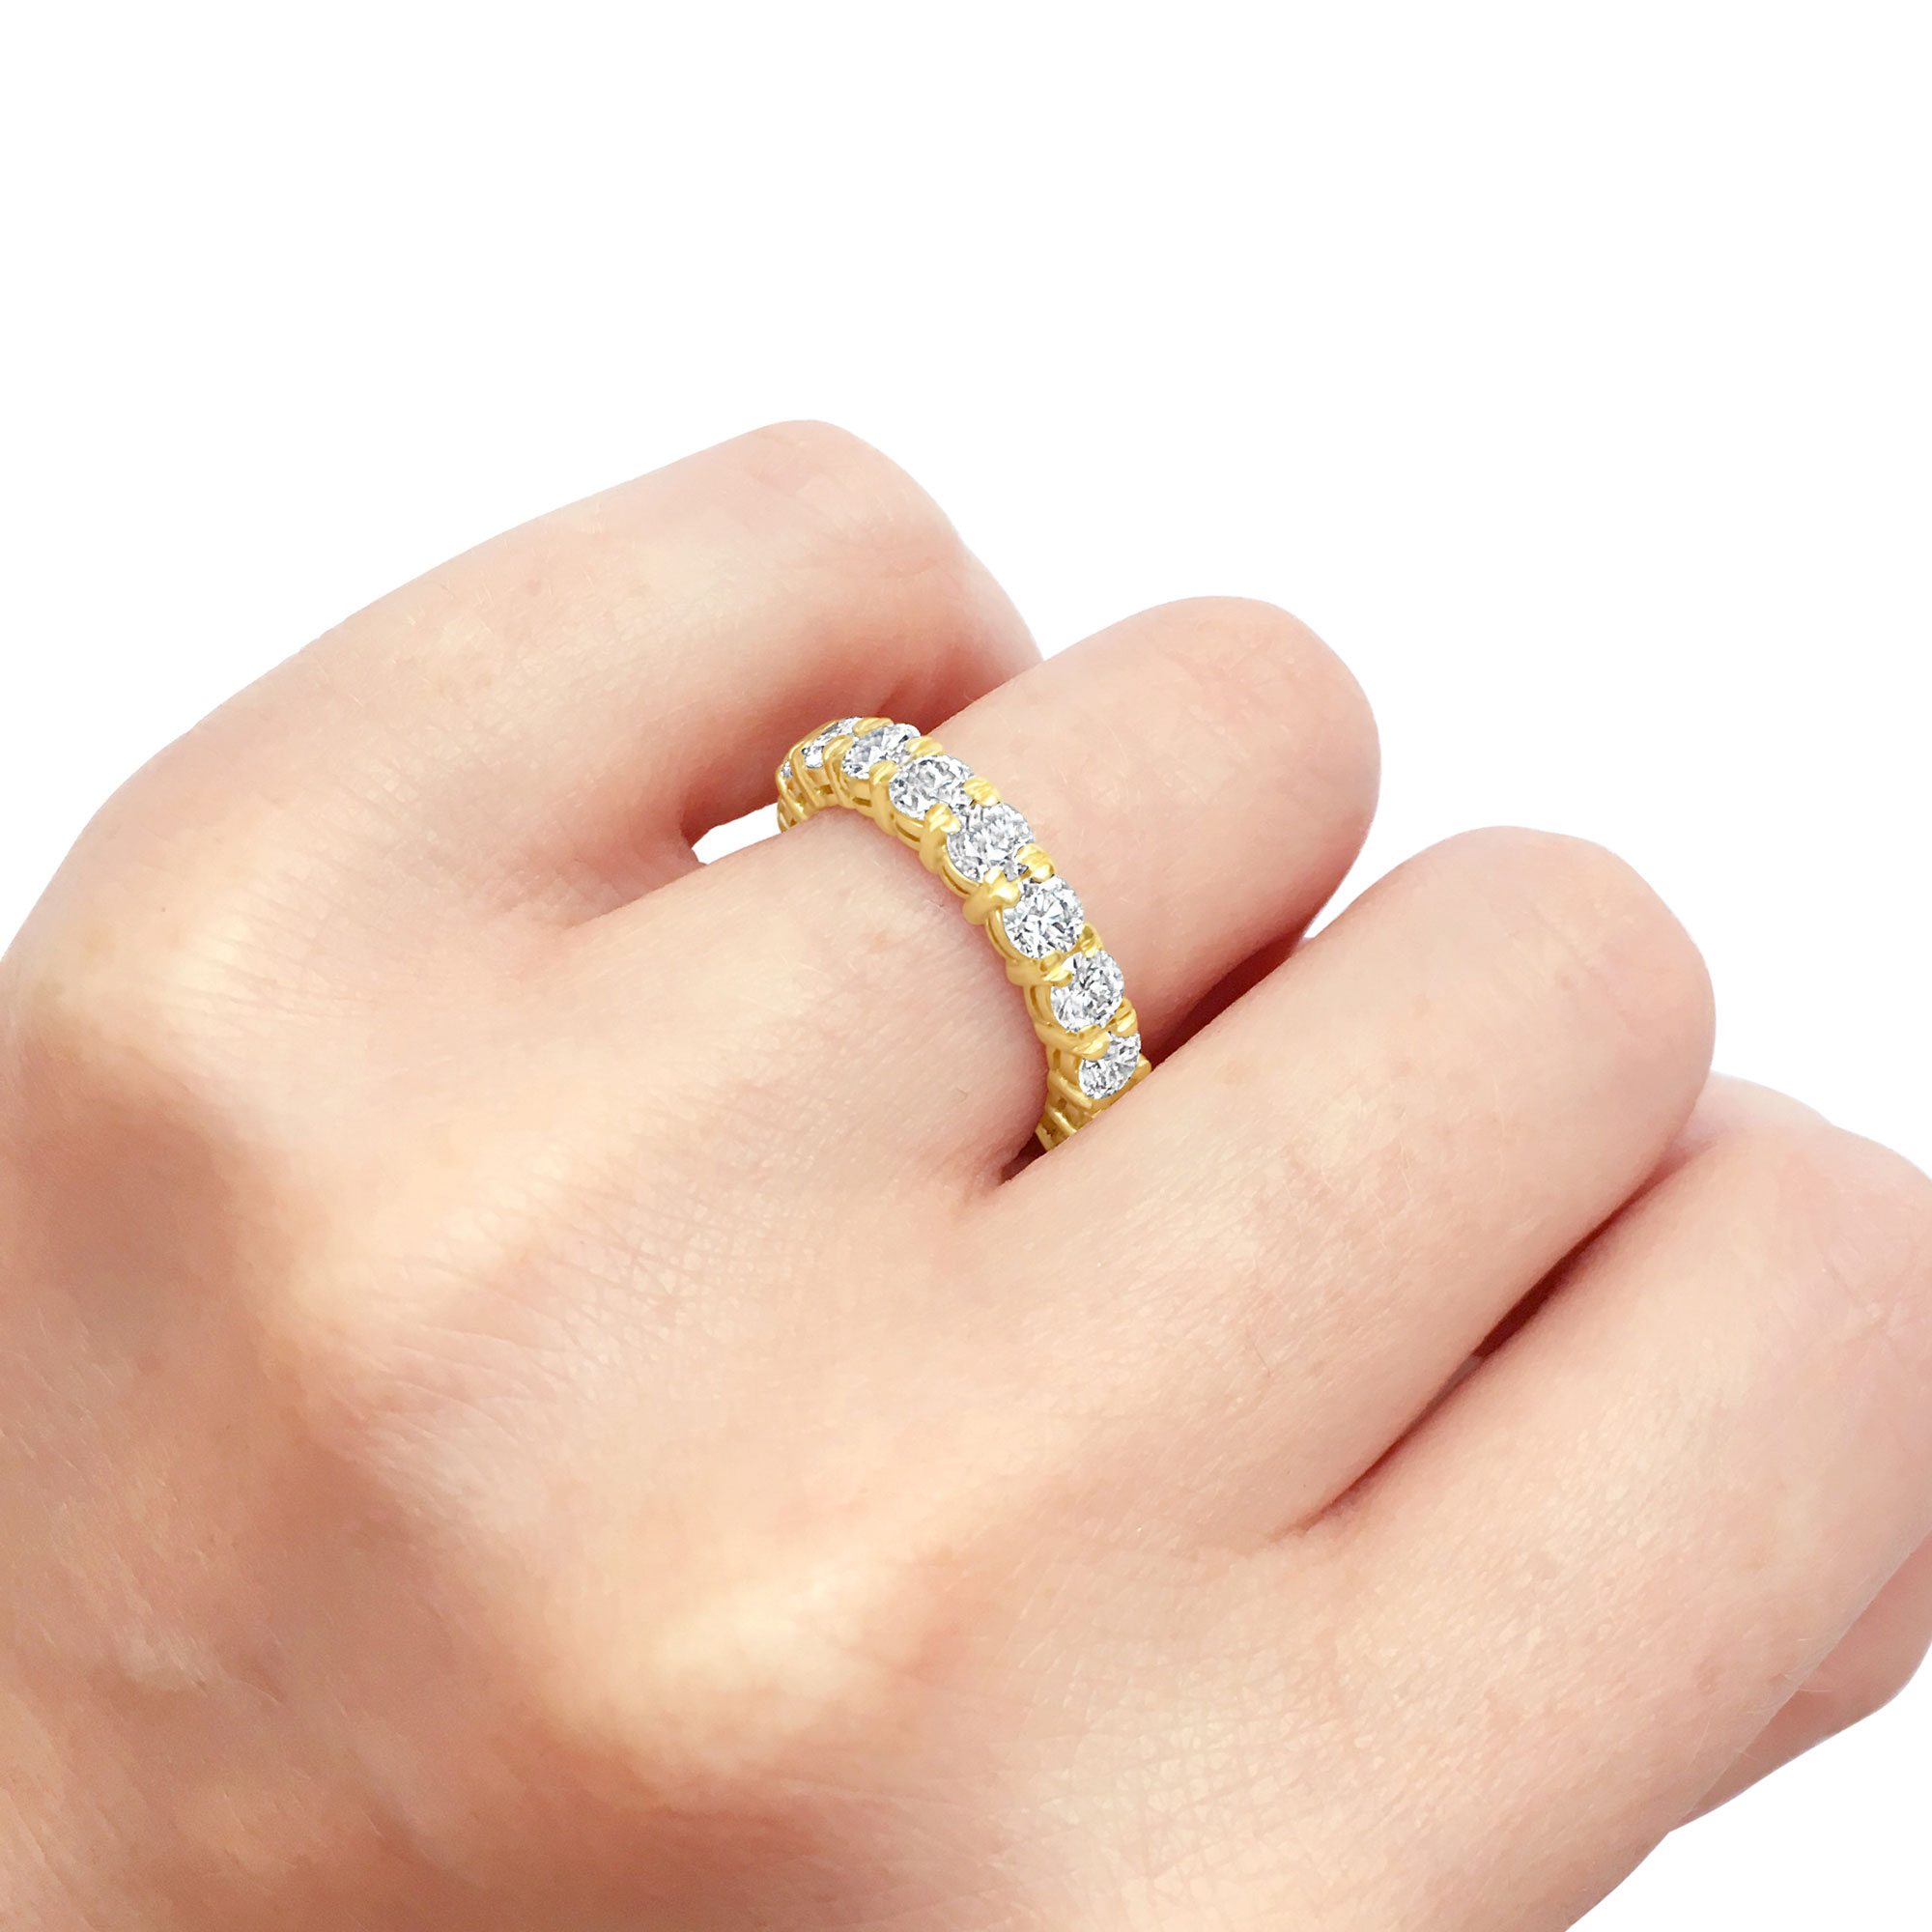 Diamond eternity ring with engagement ring